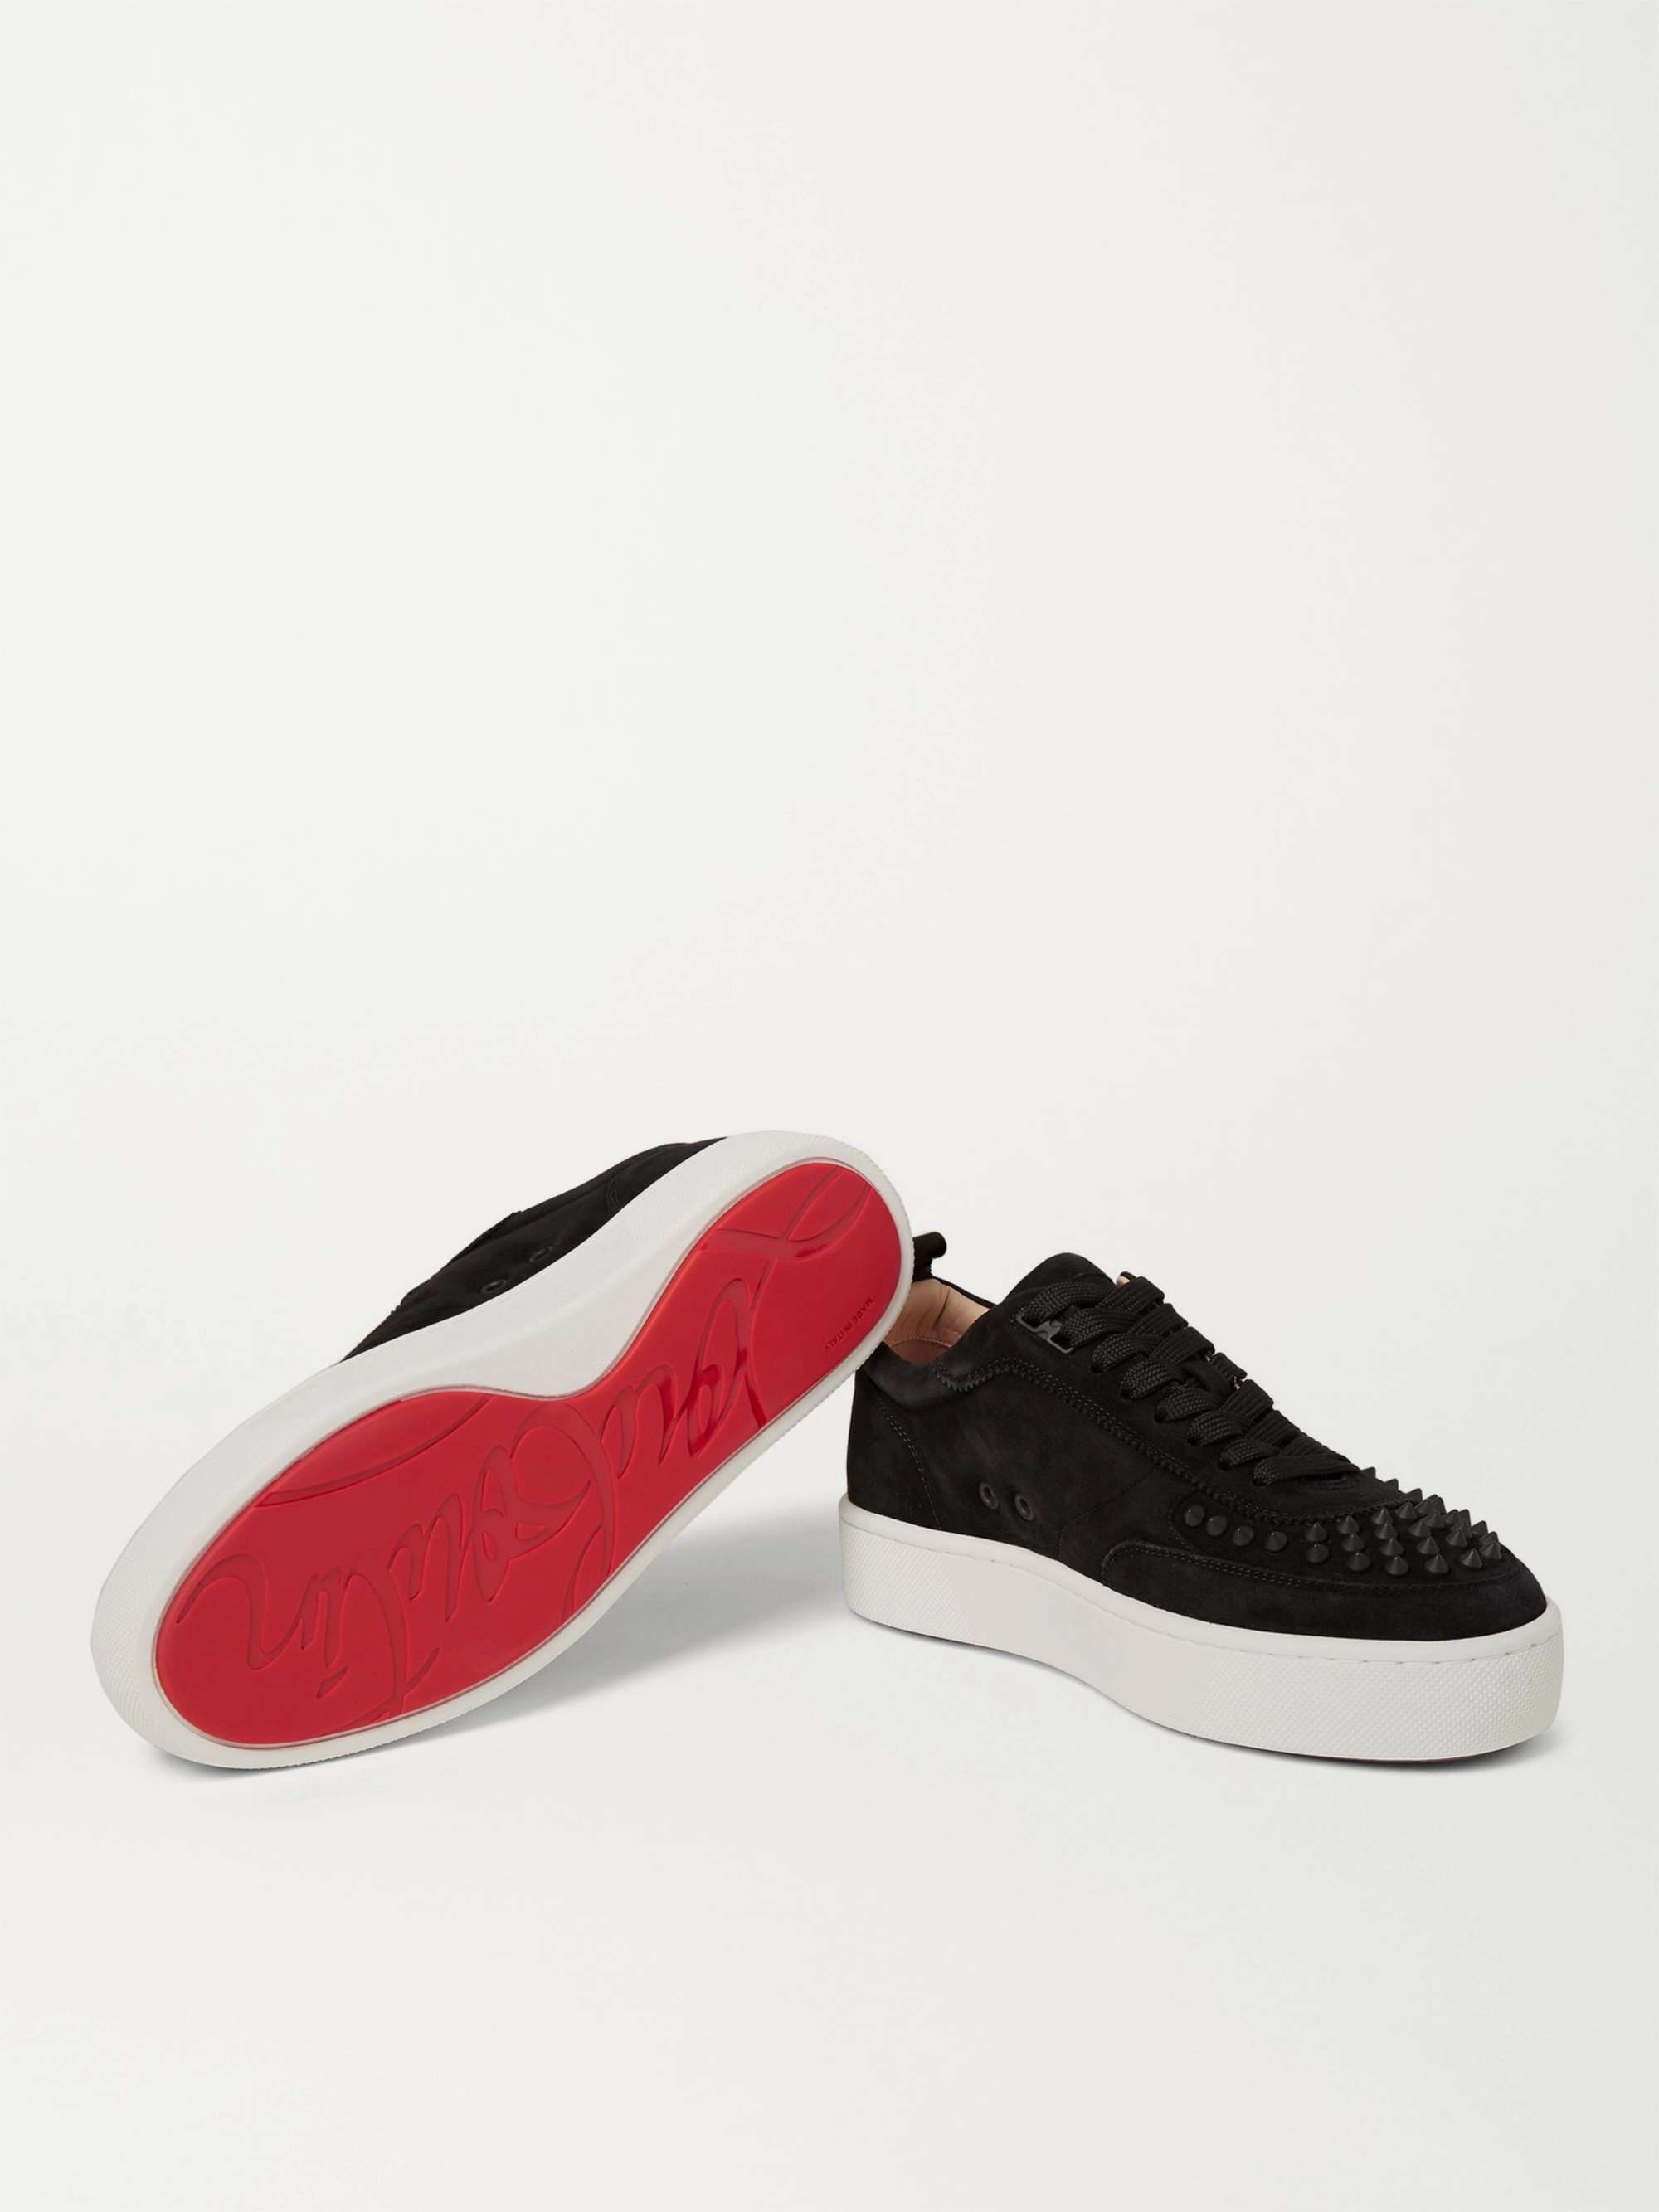 CHRISTIAN LOUBOUTIN Happyrui Spiked Leather Sneakers